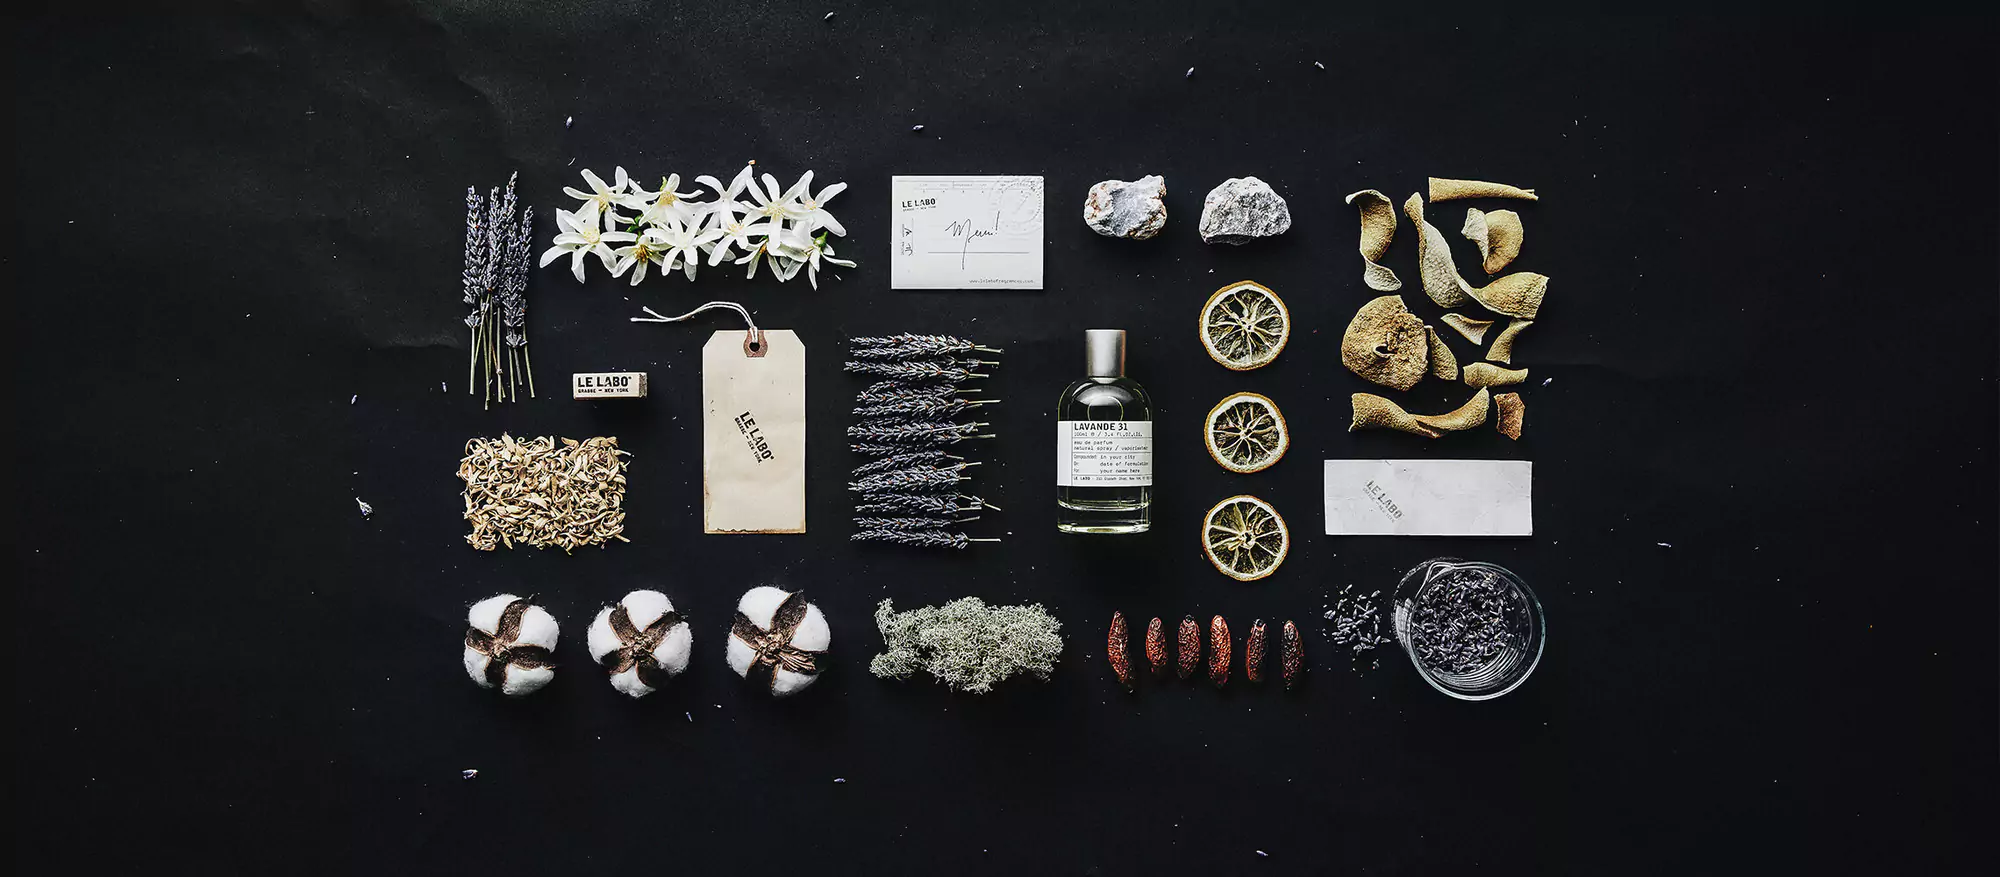 The Herbs, Florals, and Other Botanicals that Go Into Making Fine Fragrances from Le Labo